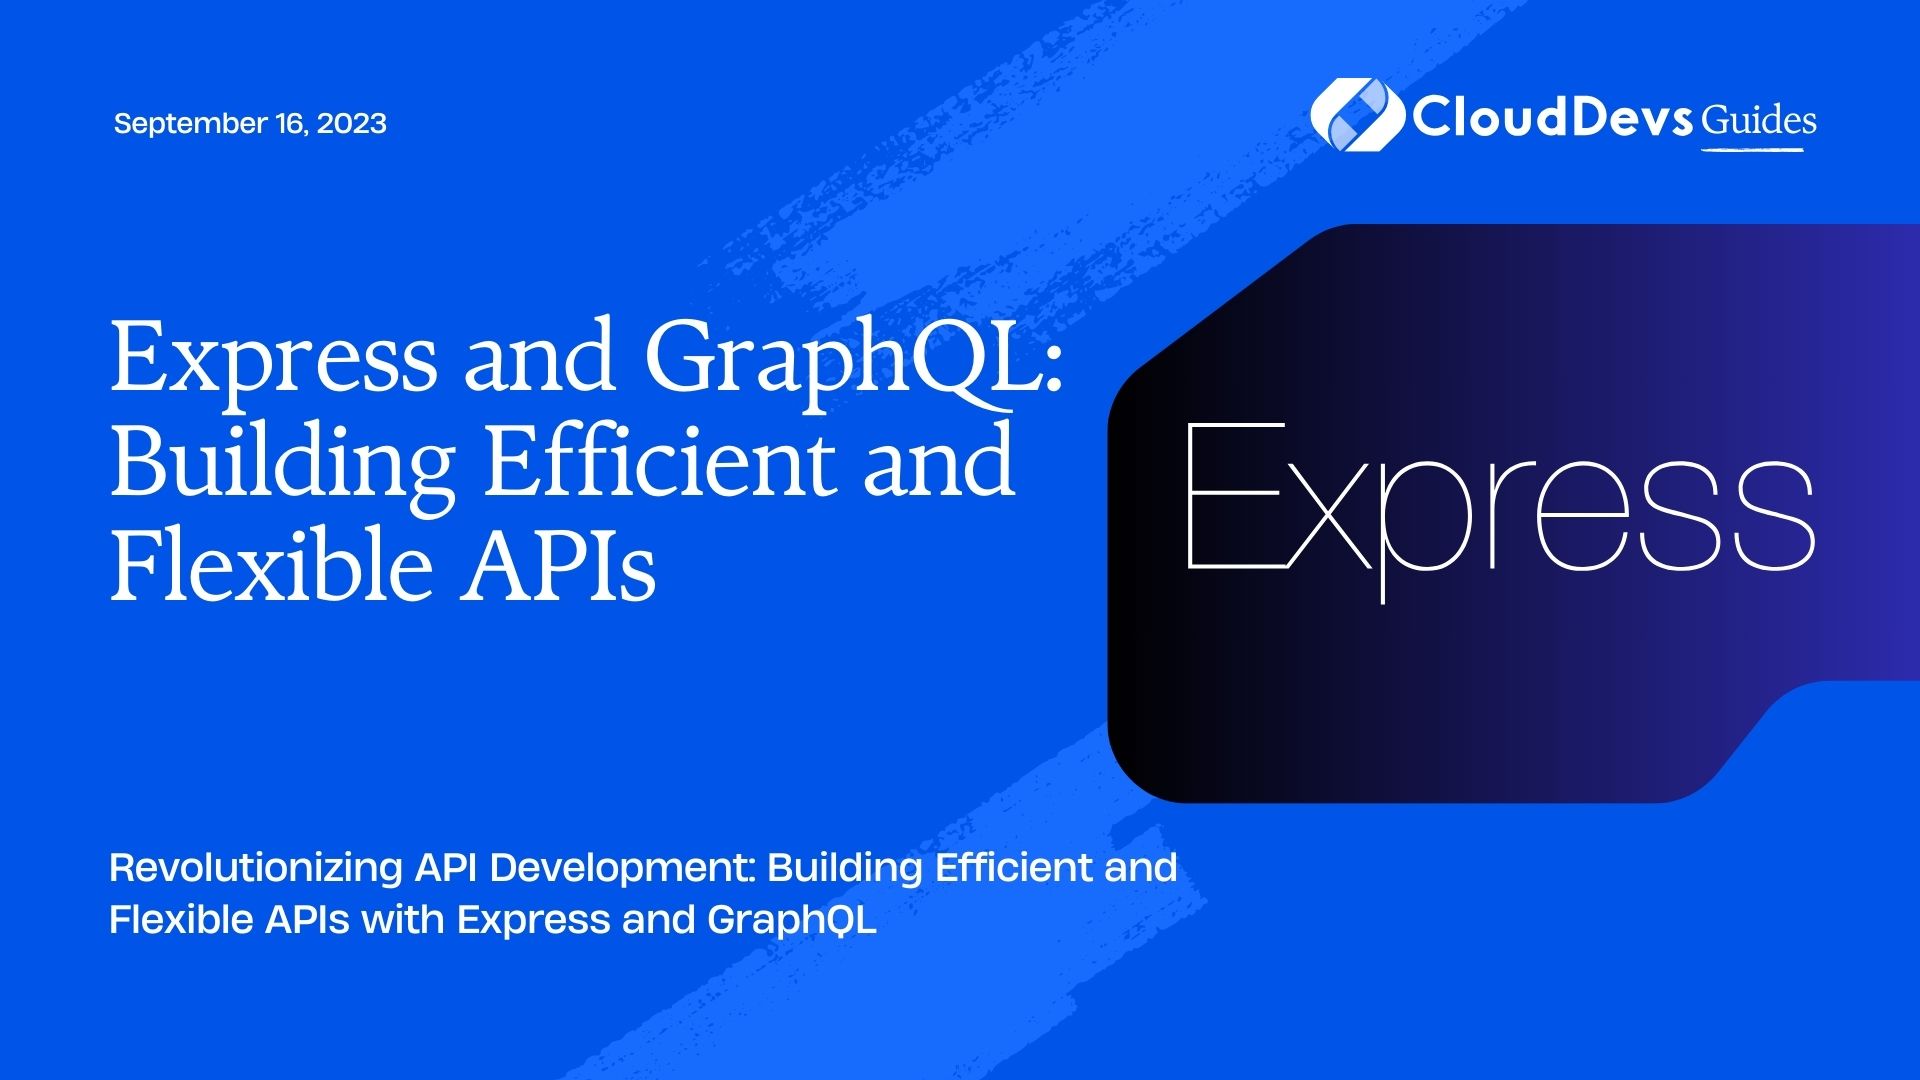 Express and GraphQL: Building Efficient and Flexible APIs